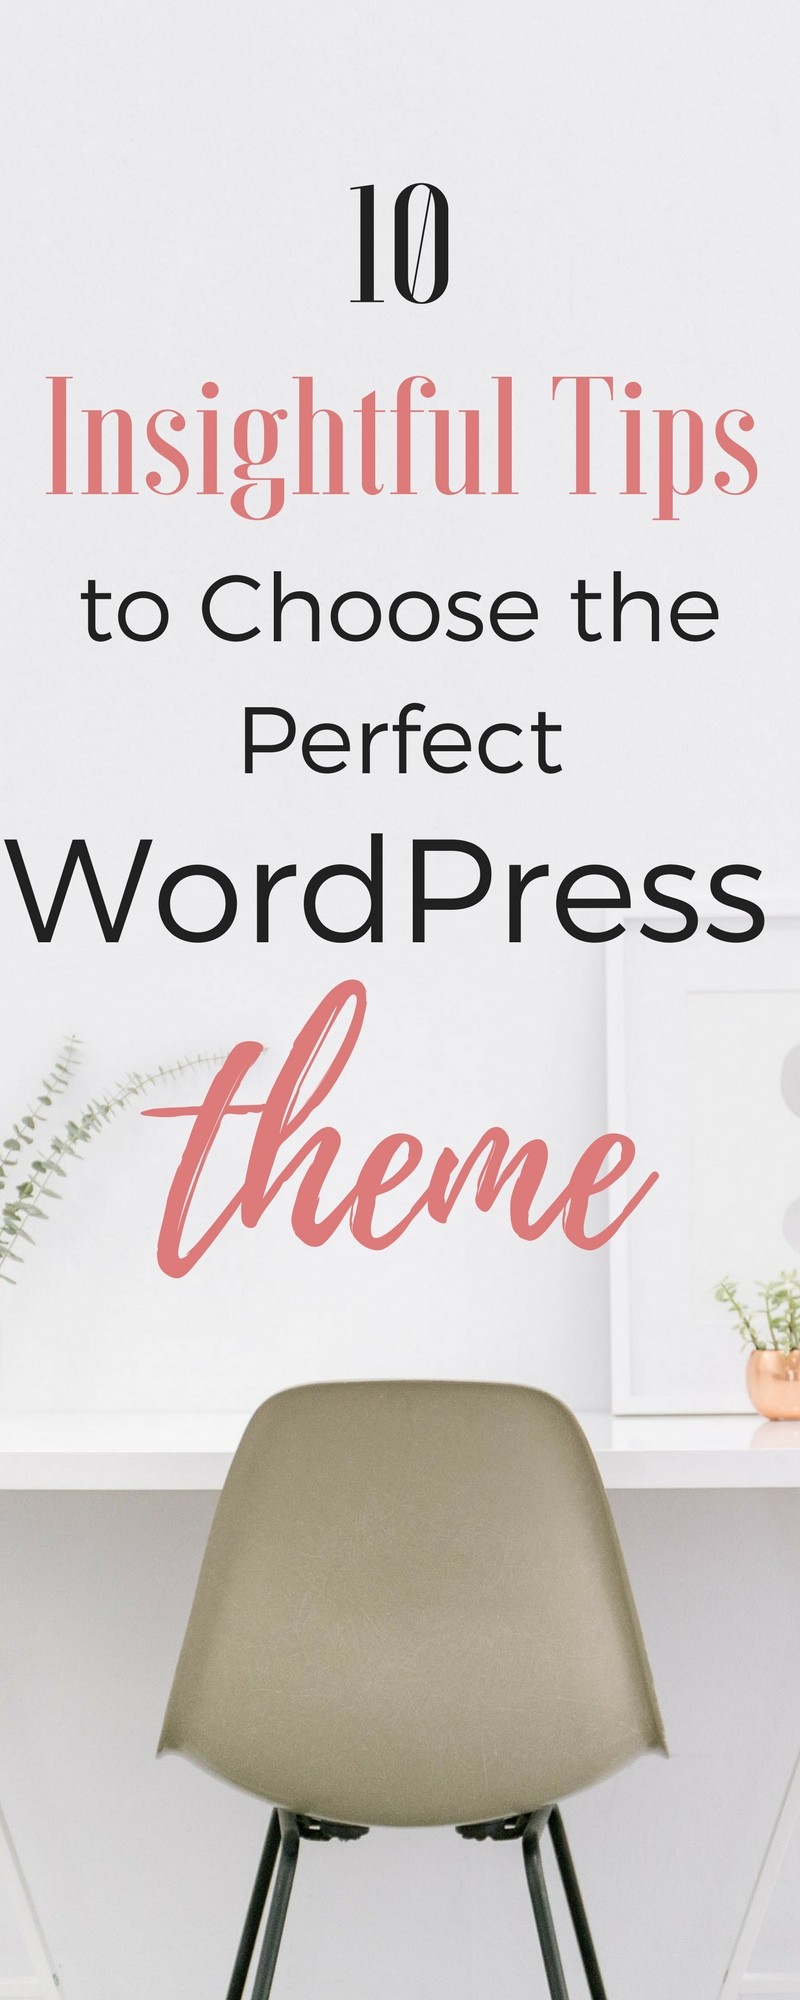 10 insightful tips to help you choose the perfect WordPress theme for you website.